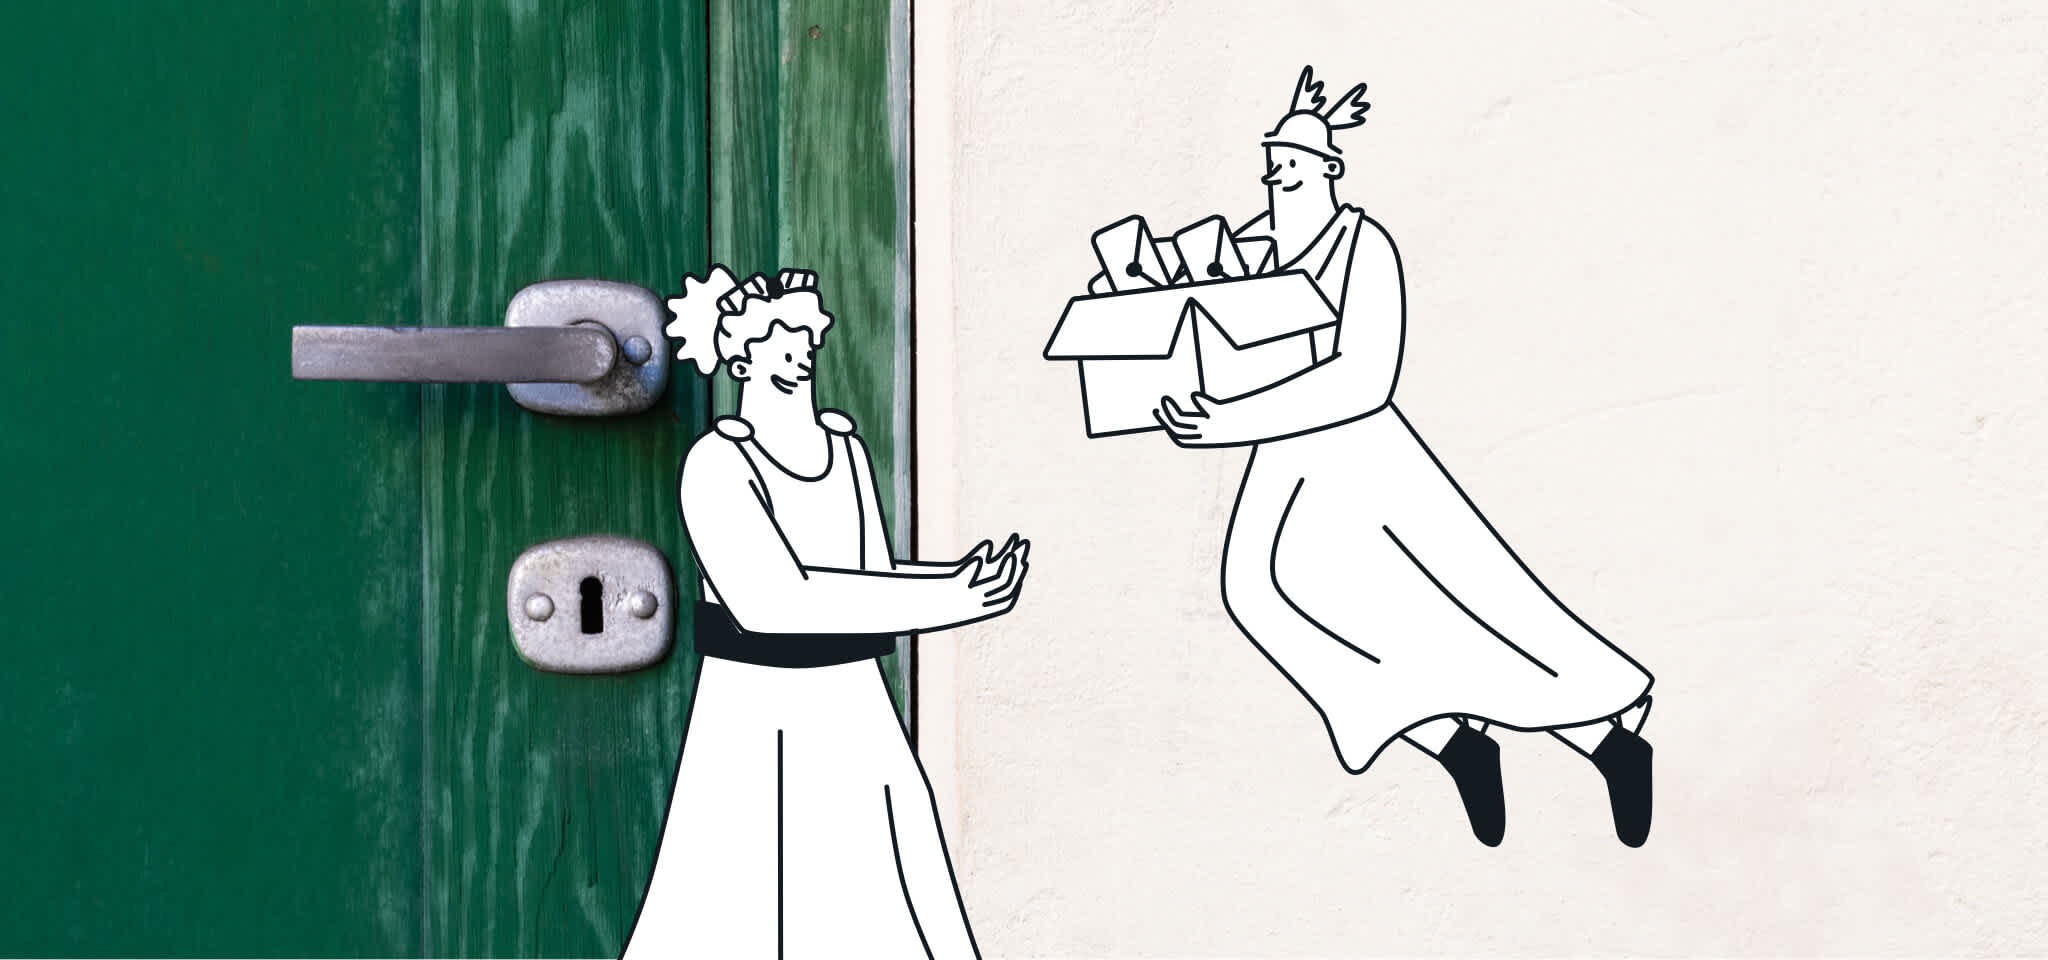 Hermes delivers mail to a Goddess by a green door